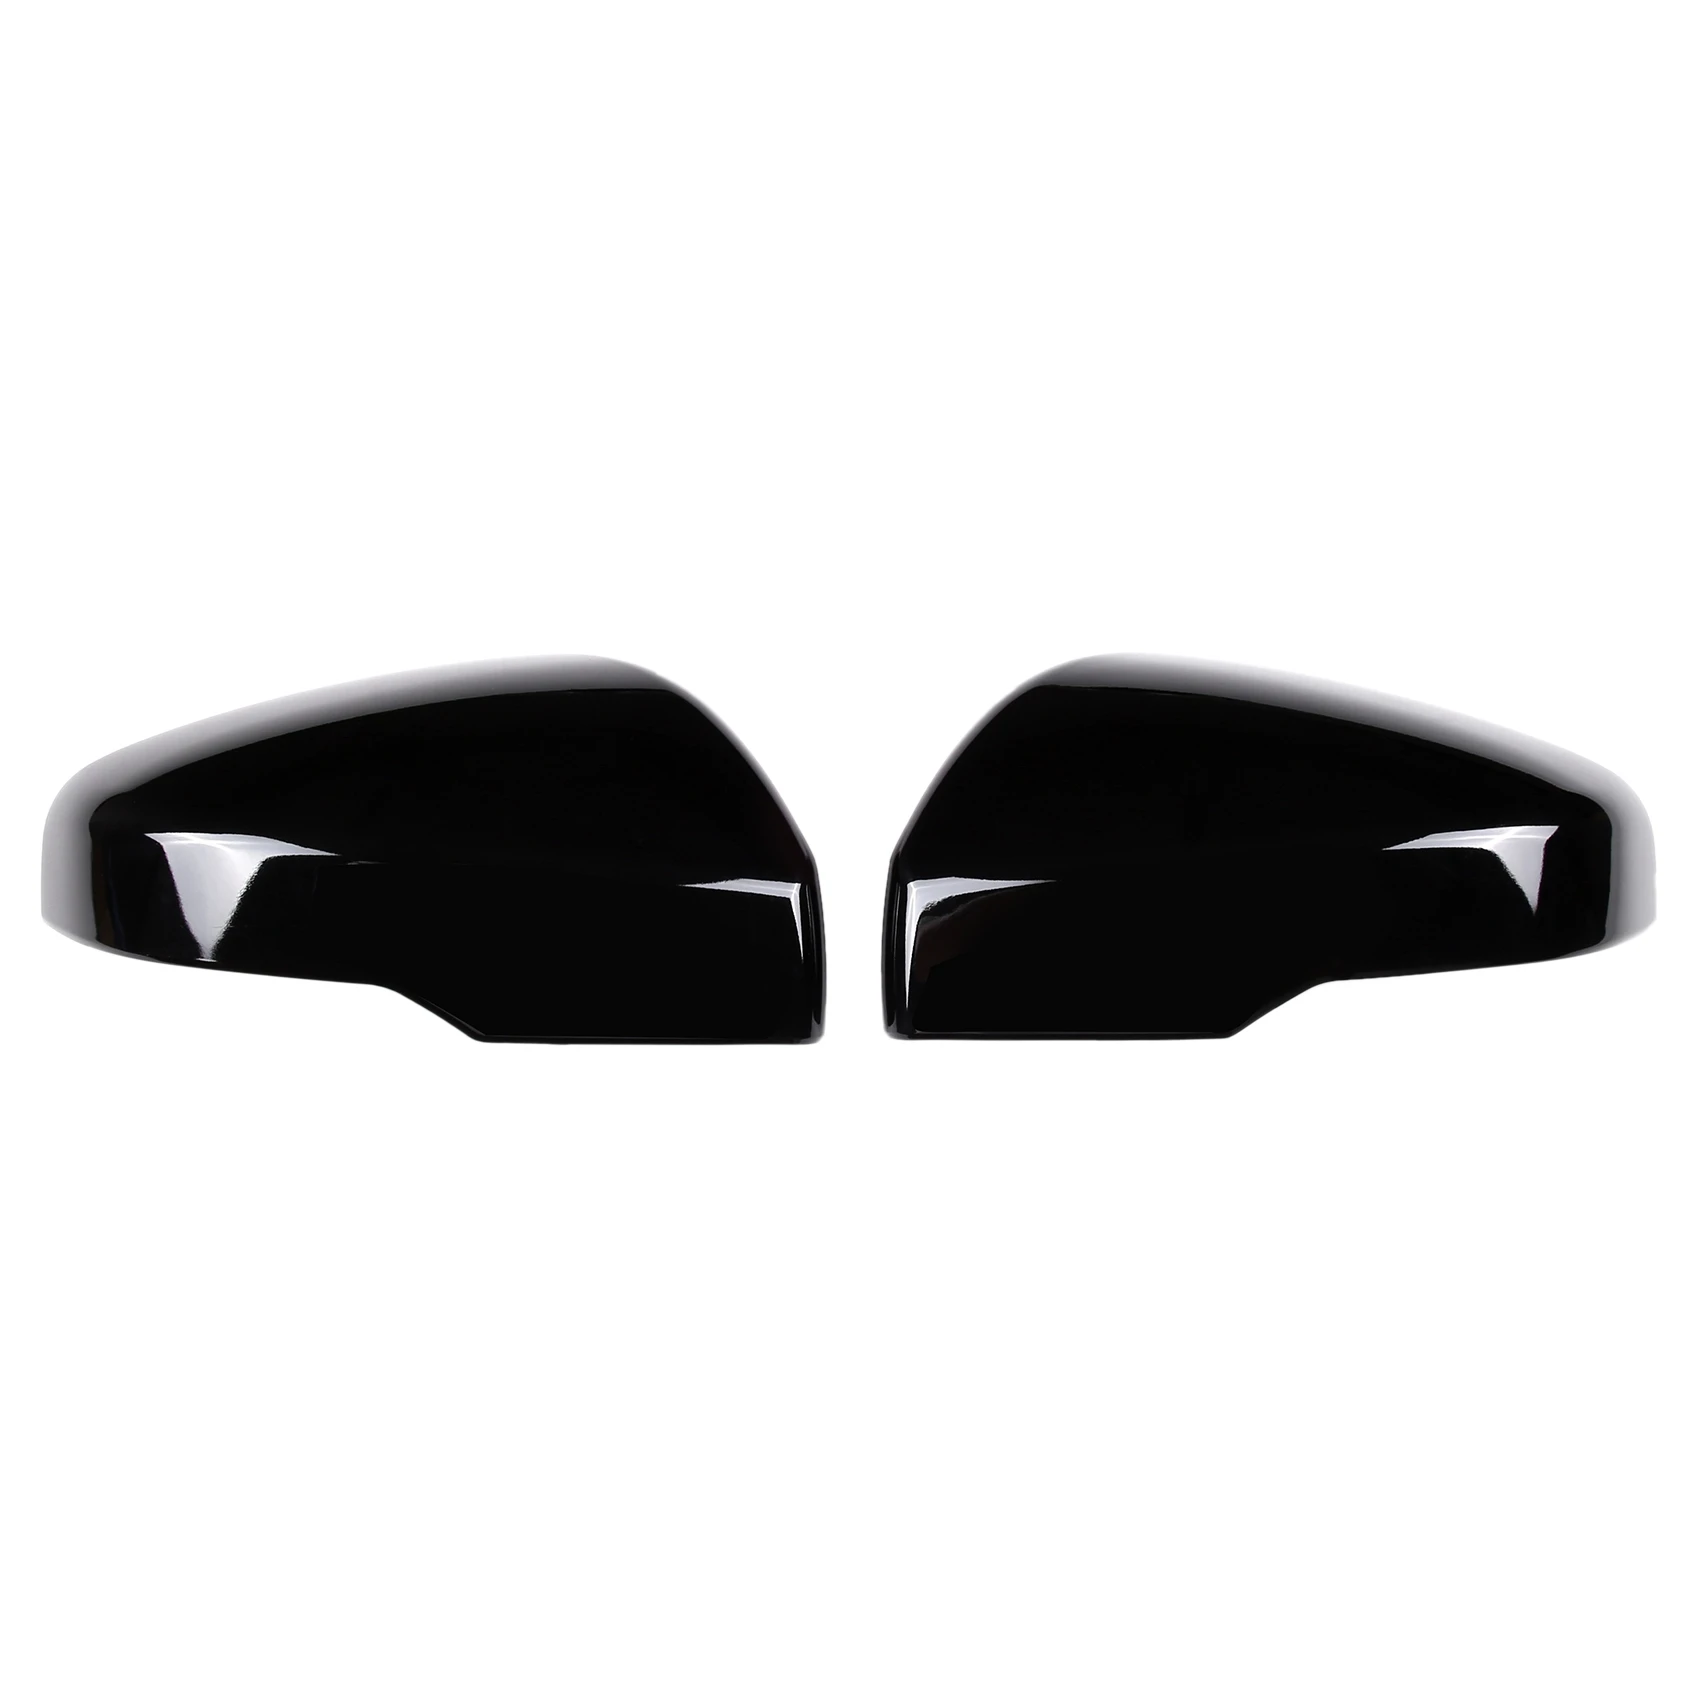 For Subaru Forester/Outback/Legacy/XV 2019-2022 Black ABS Car Rear View Cap Cover Trim Car Styling